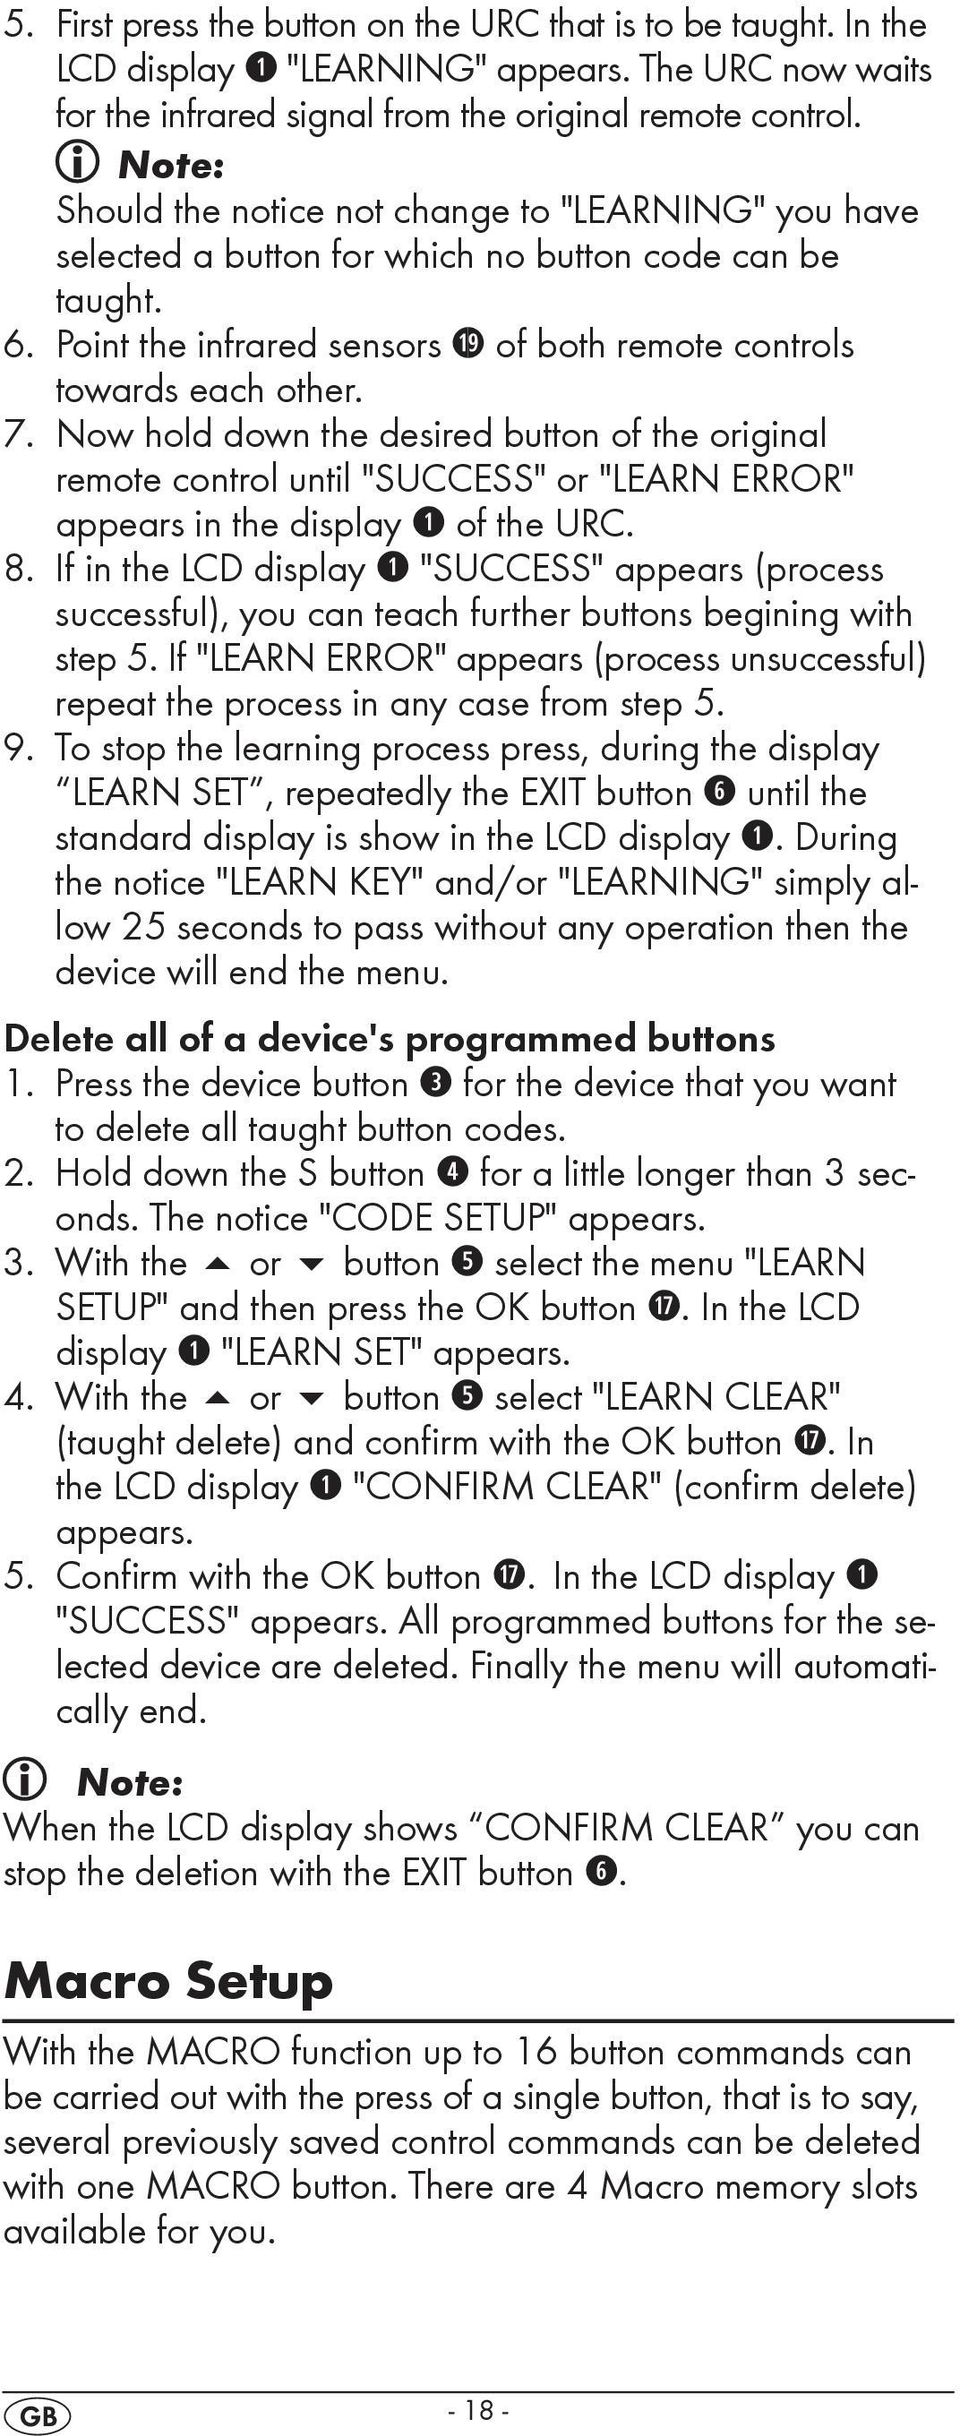 Now hold down the desired button of the original remote control until "SUCCESS" or "LEARN ERROR" appears in the display q of the URC. 8.